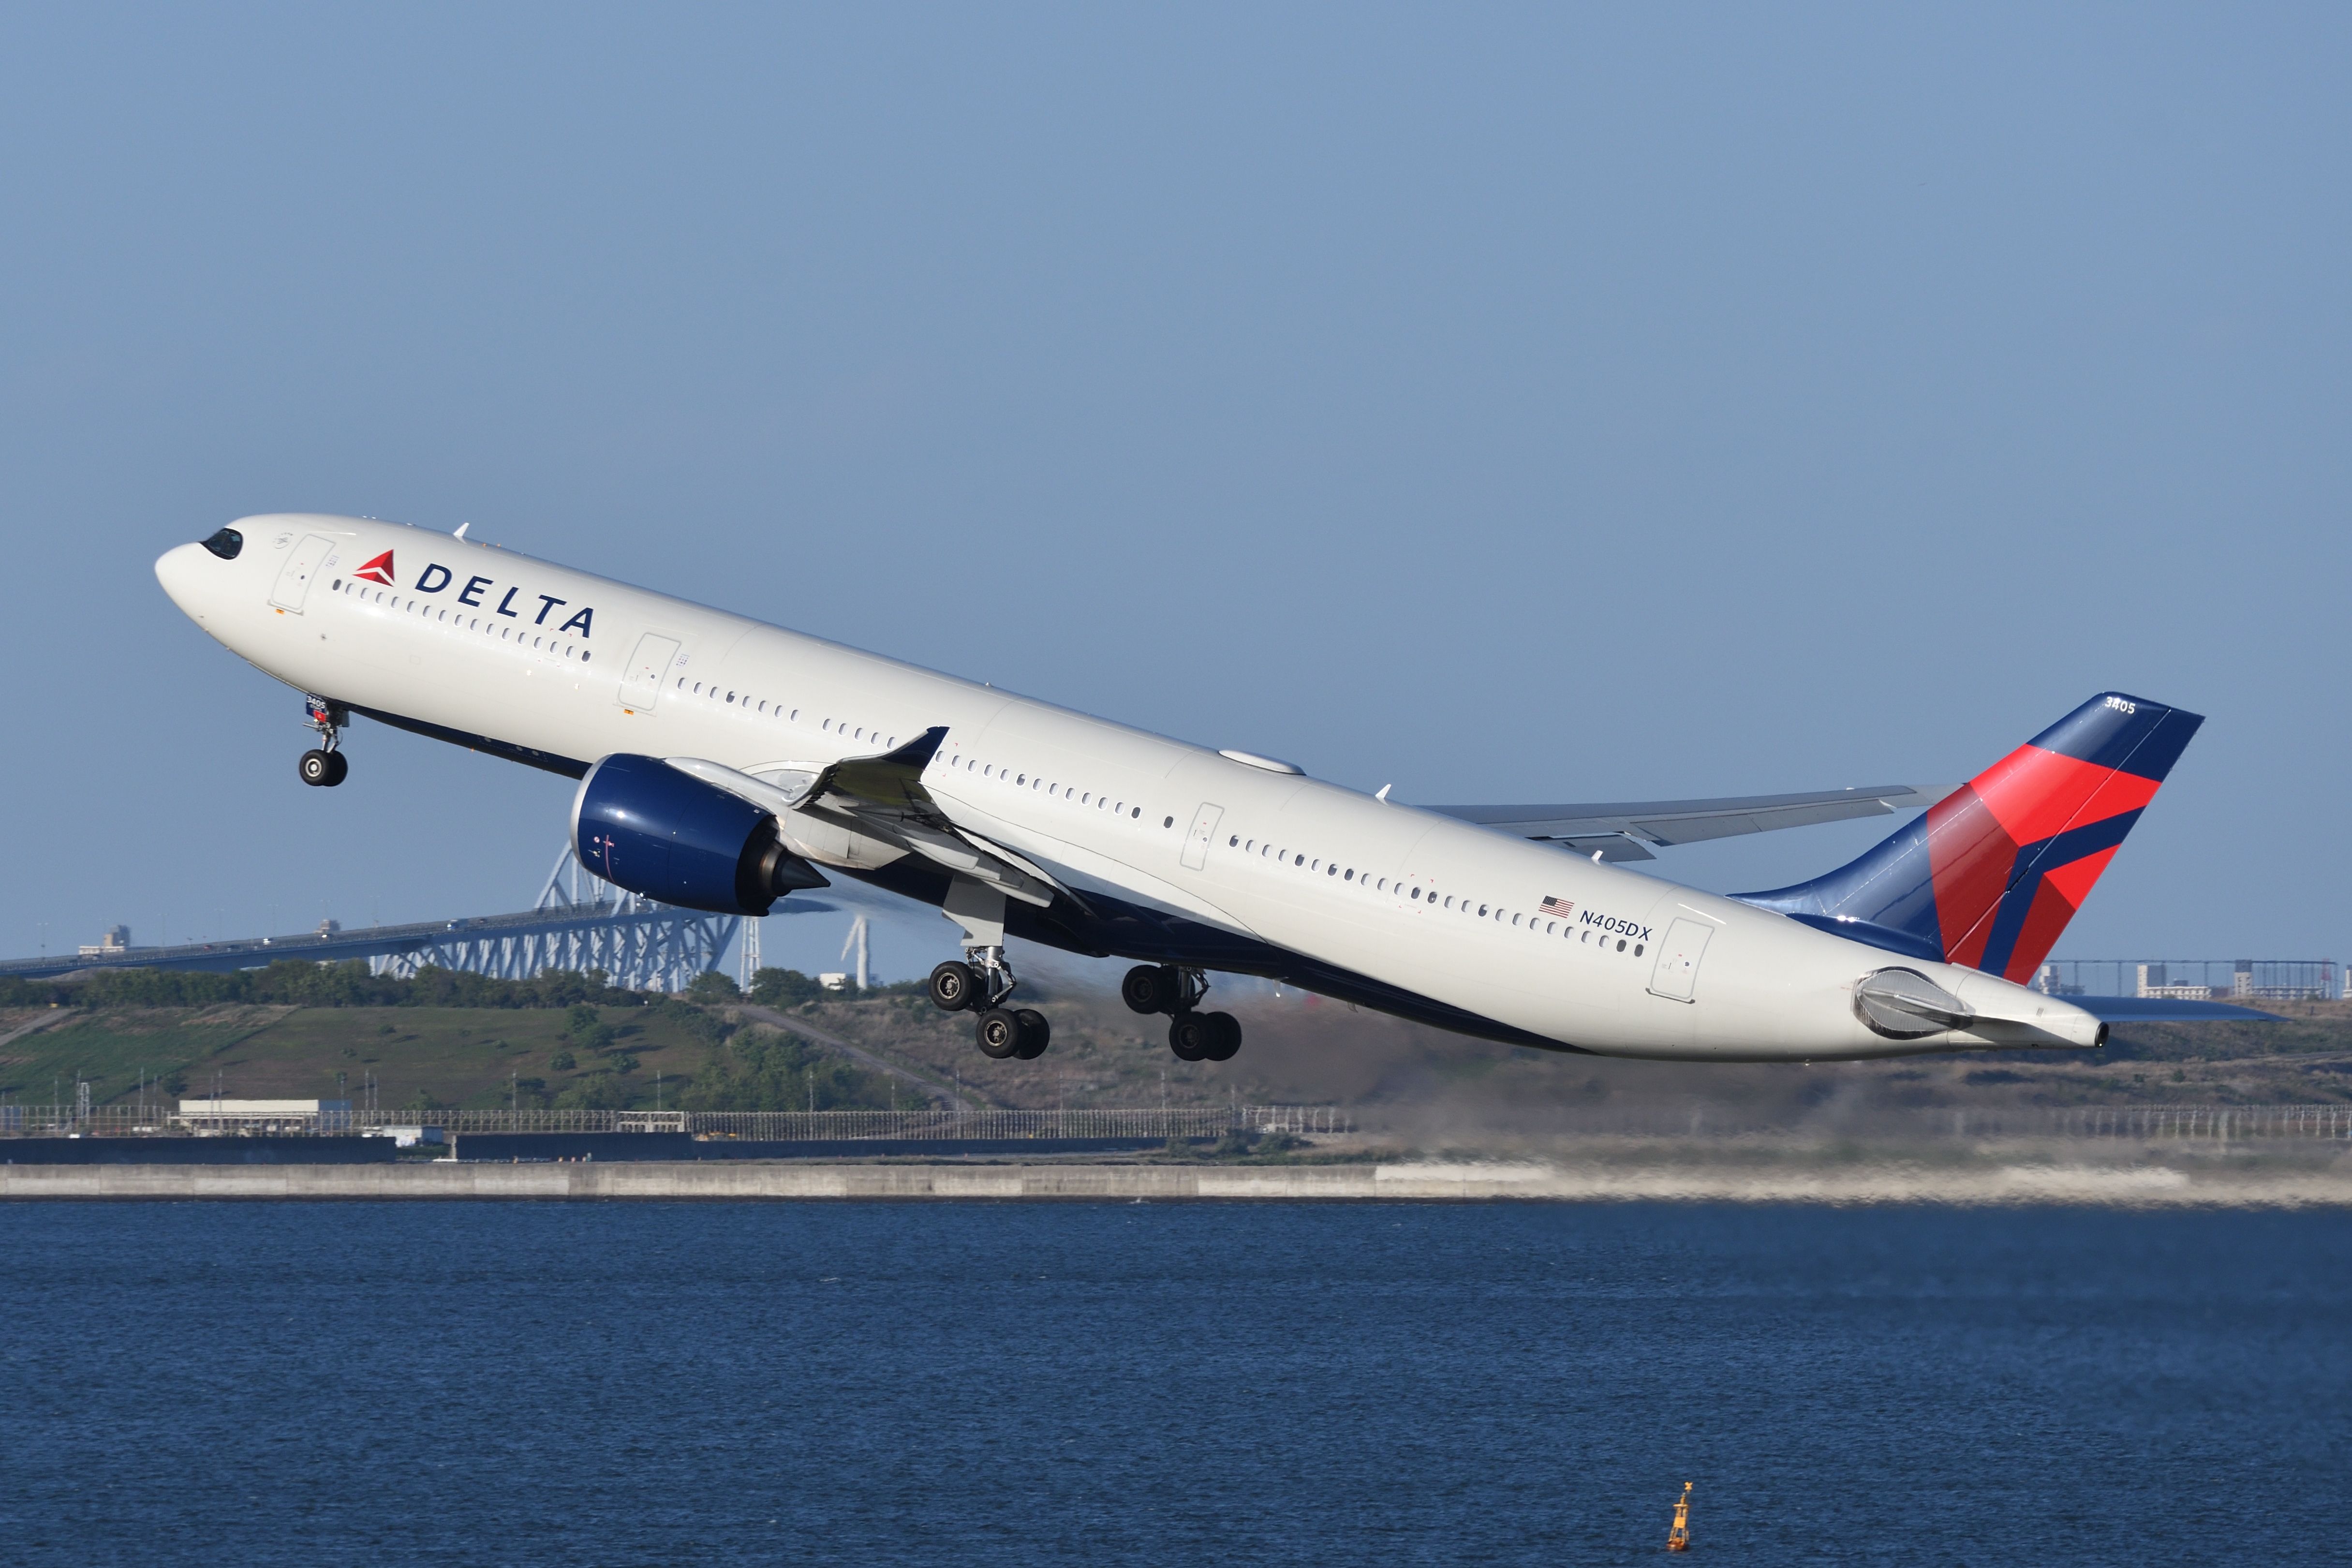 A Delta Air Lines Airbus A330-900neo taking off from Tokyo, Japan.